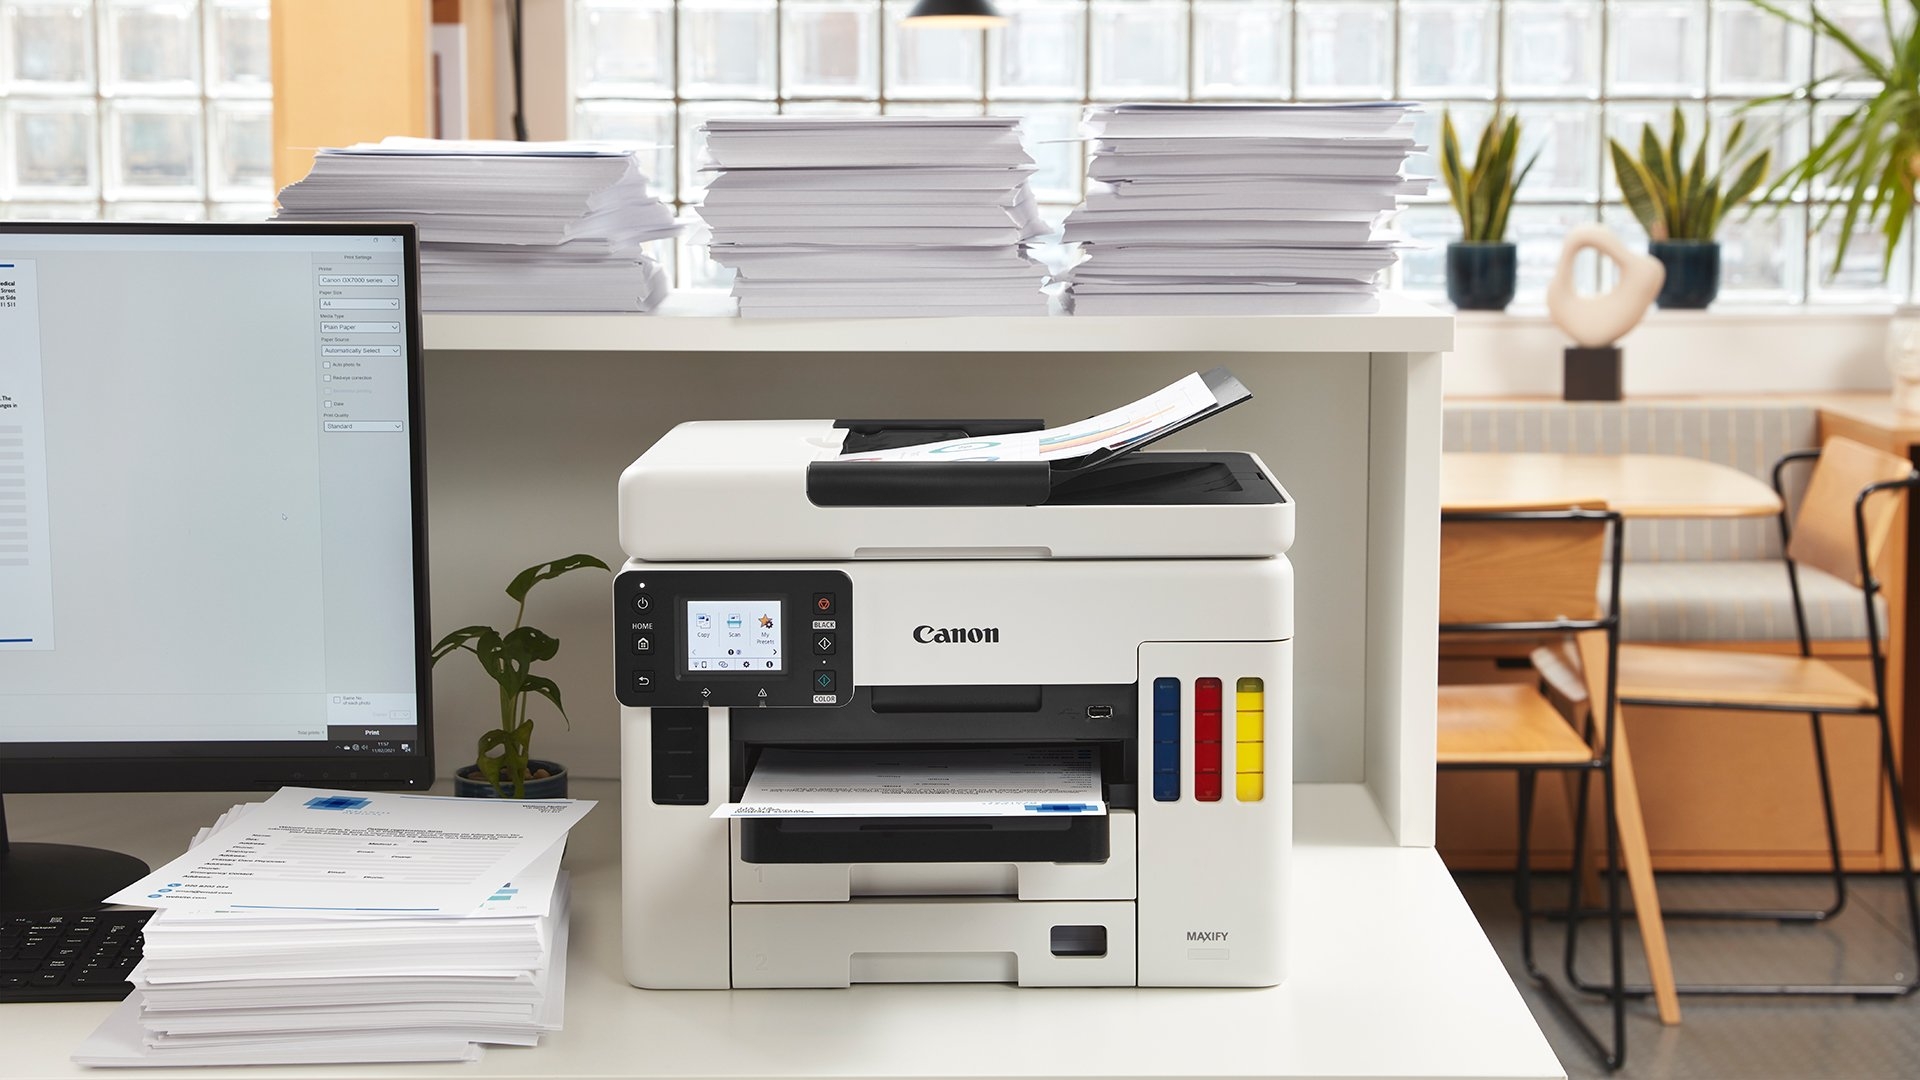 How to Install Canon MAXIFY Printer in Linux - Featured